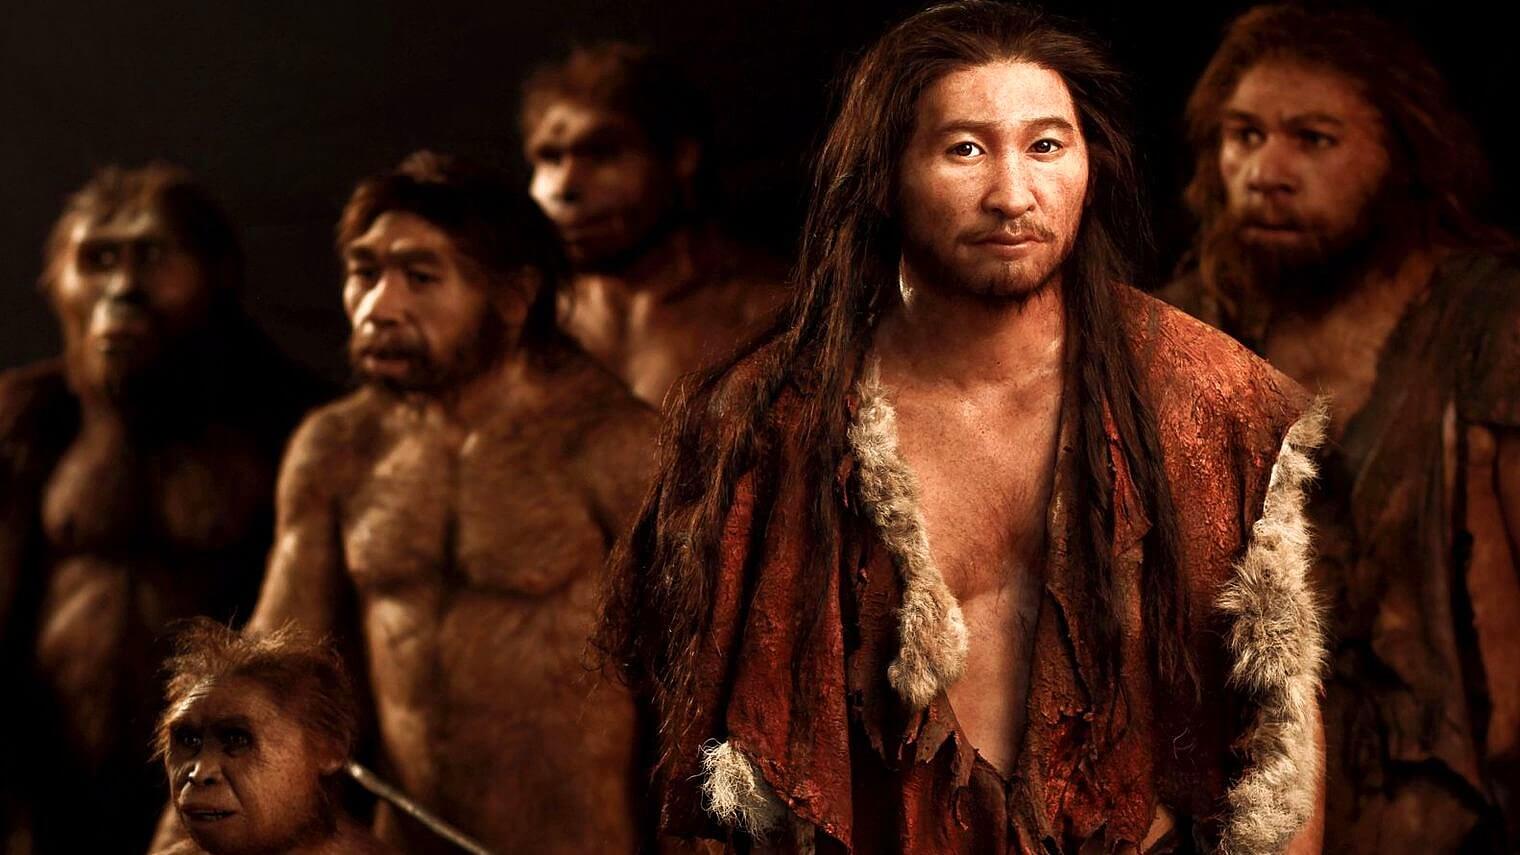 Is it true that our ancestors killed the Neanderthals?